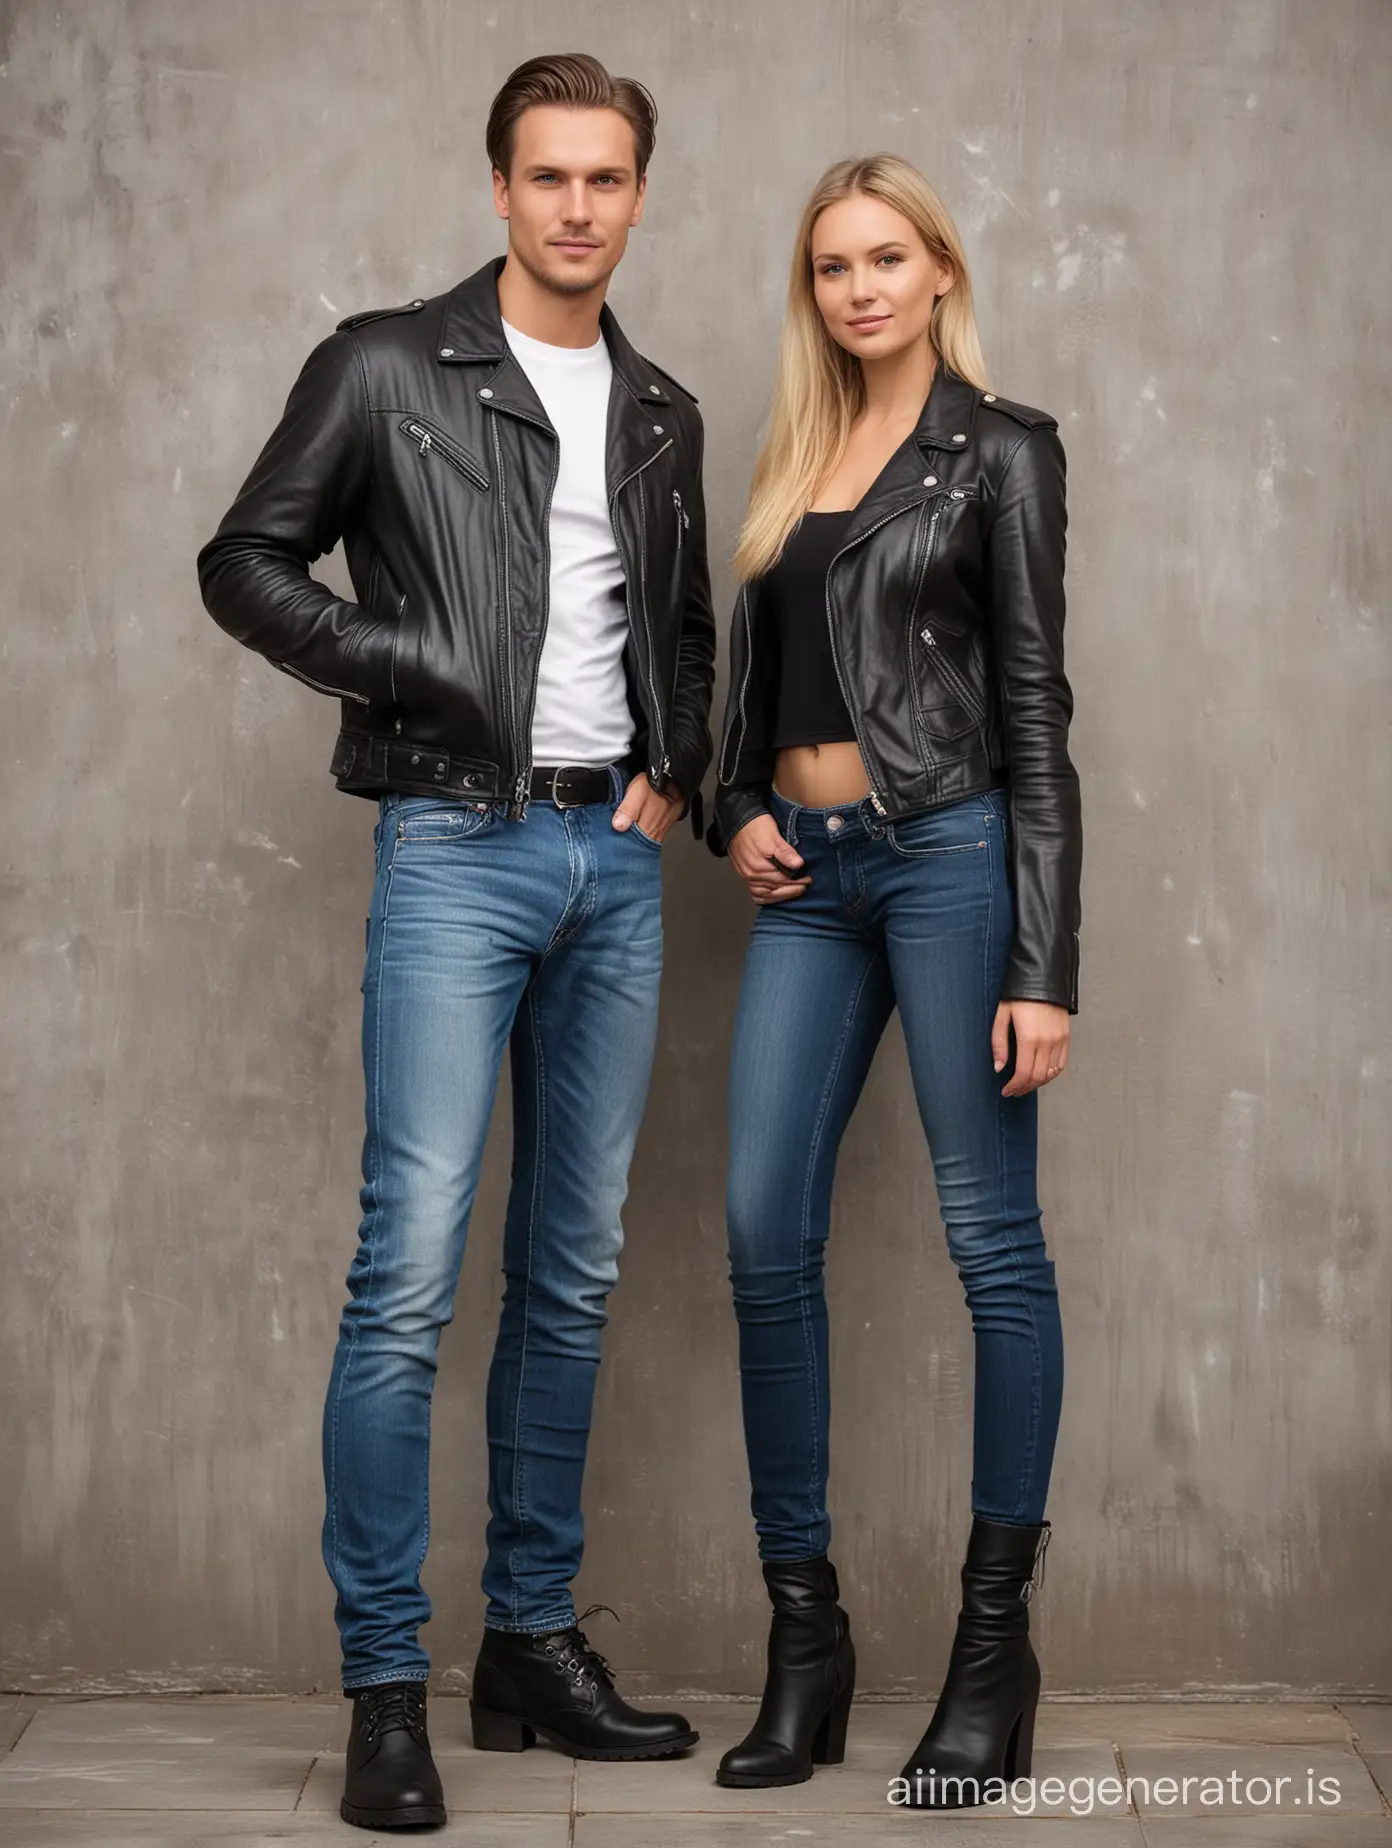 couple of FINNISH man and FINNISH woman 30 years old wearing jeans and leather jacket FULL BODY FROM HEAD TO TOE LONG LEGS FULL FIGURES